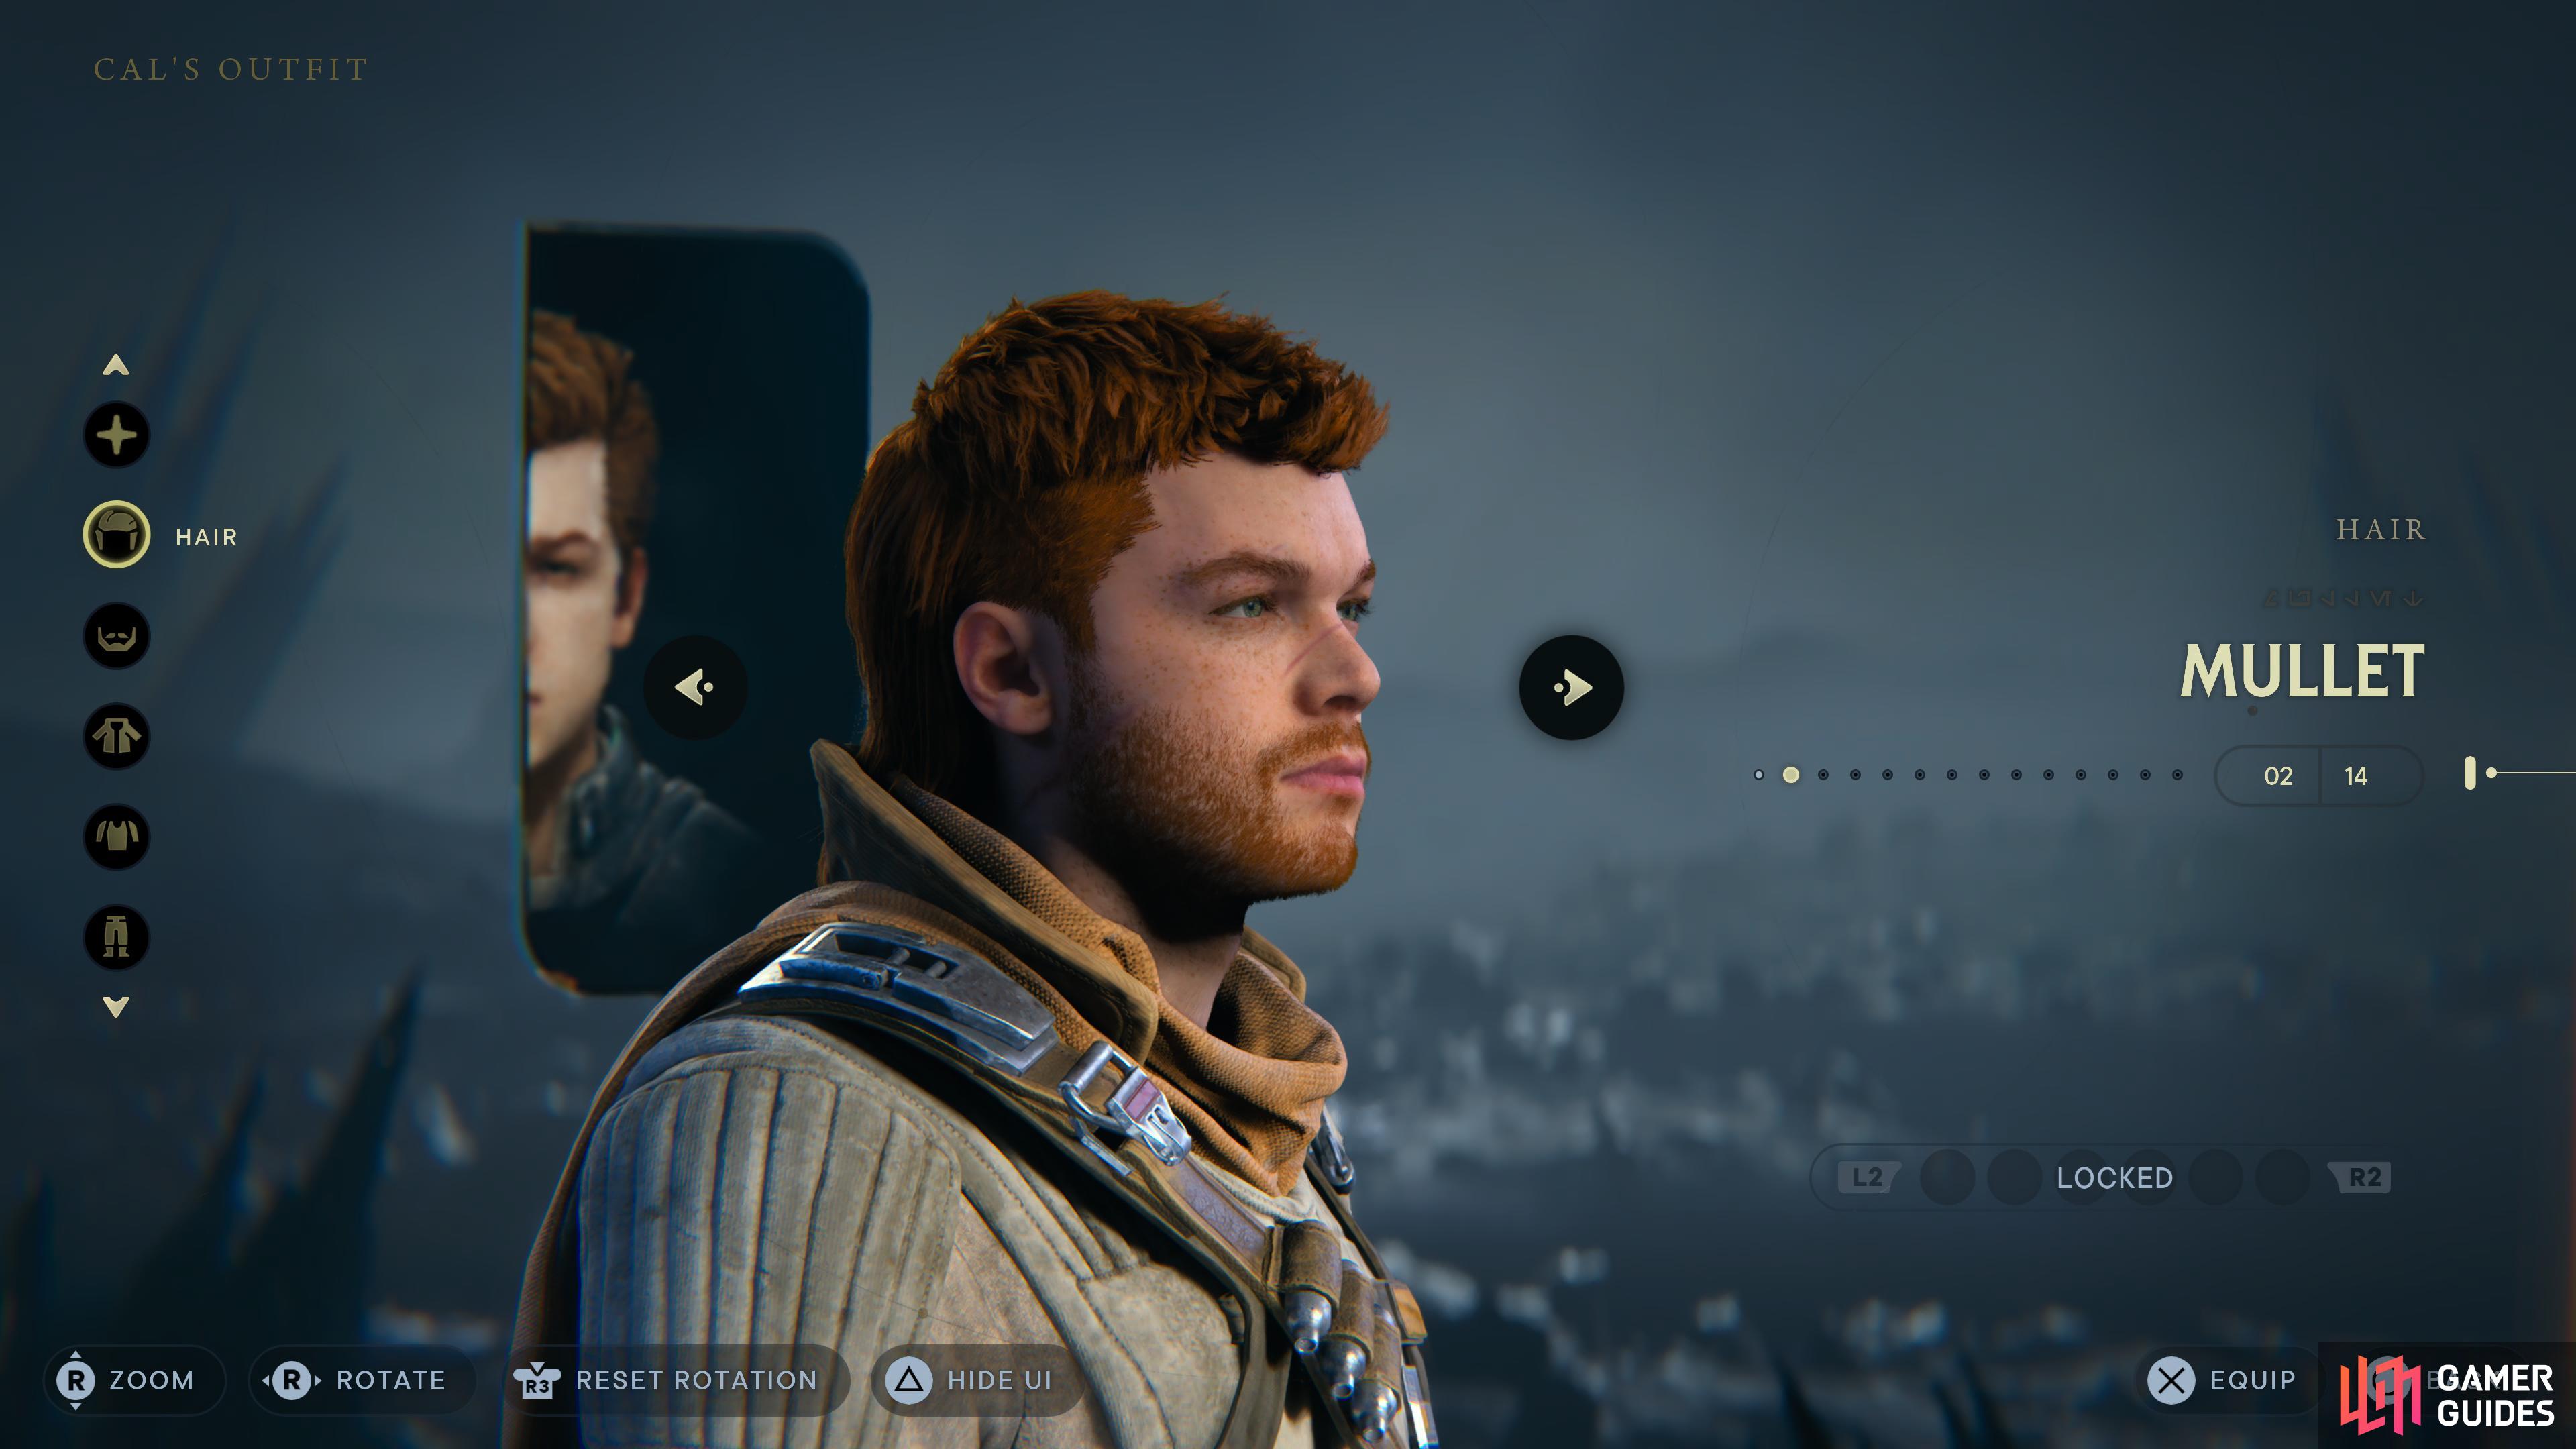 The mullet is the first hairstyle you will find in Star Wars Jedi: Survivor.